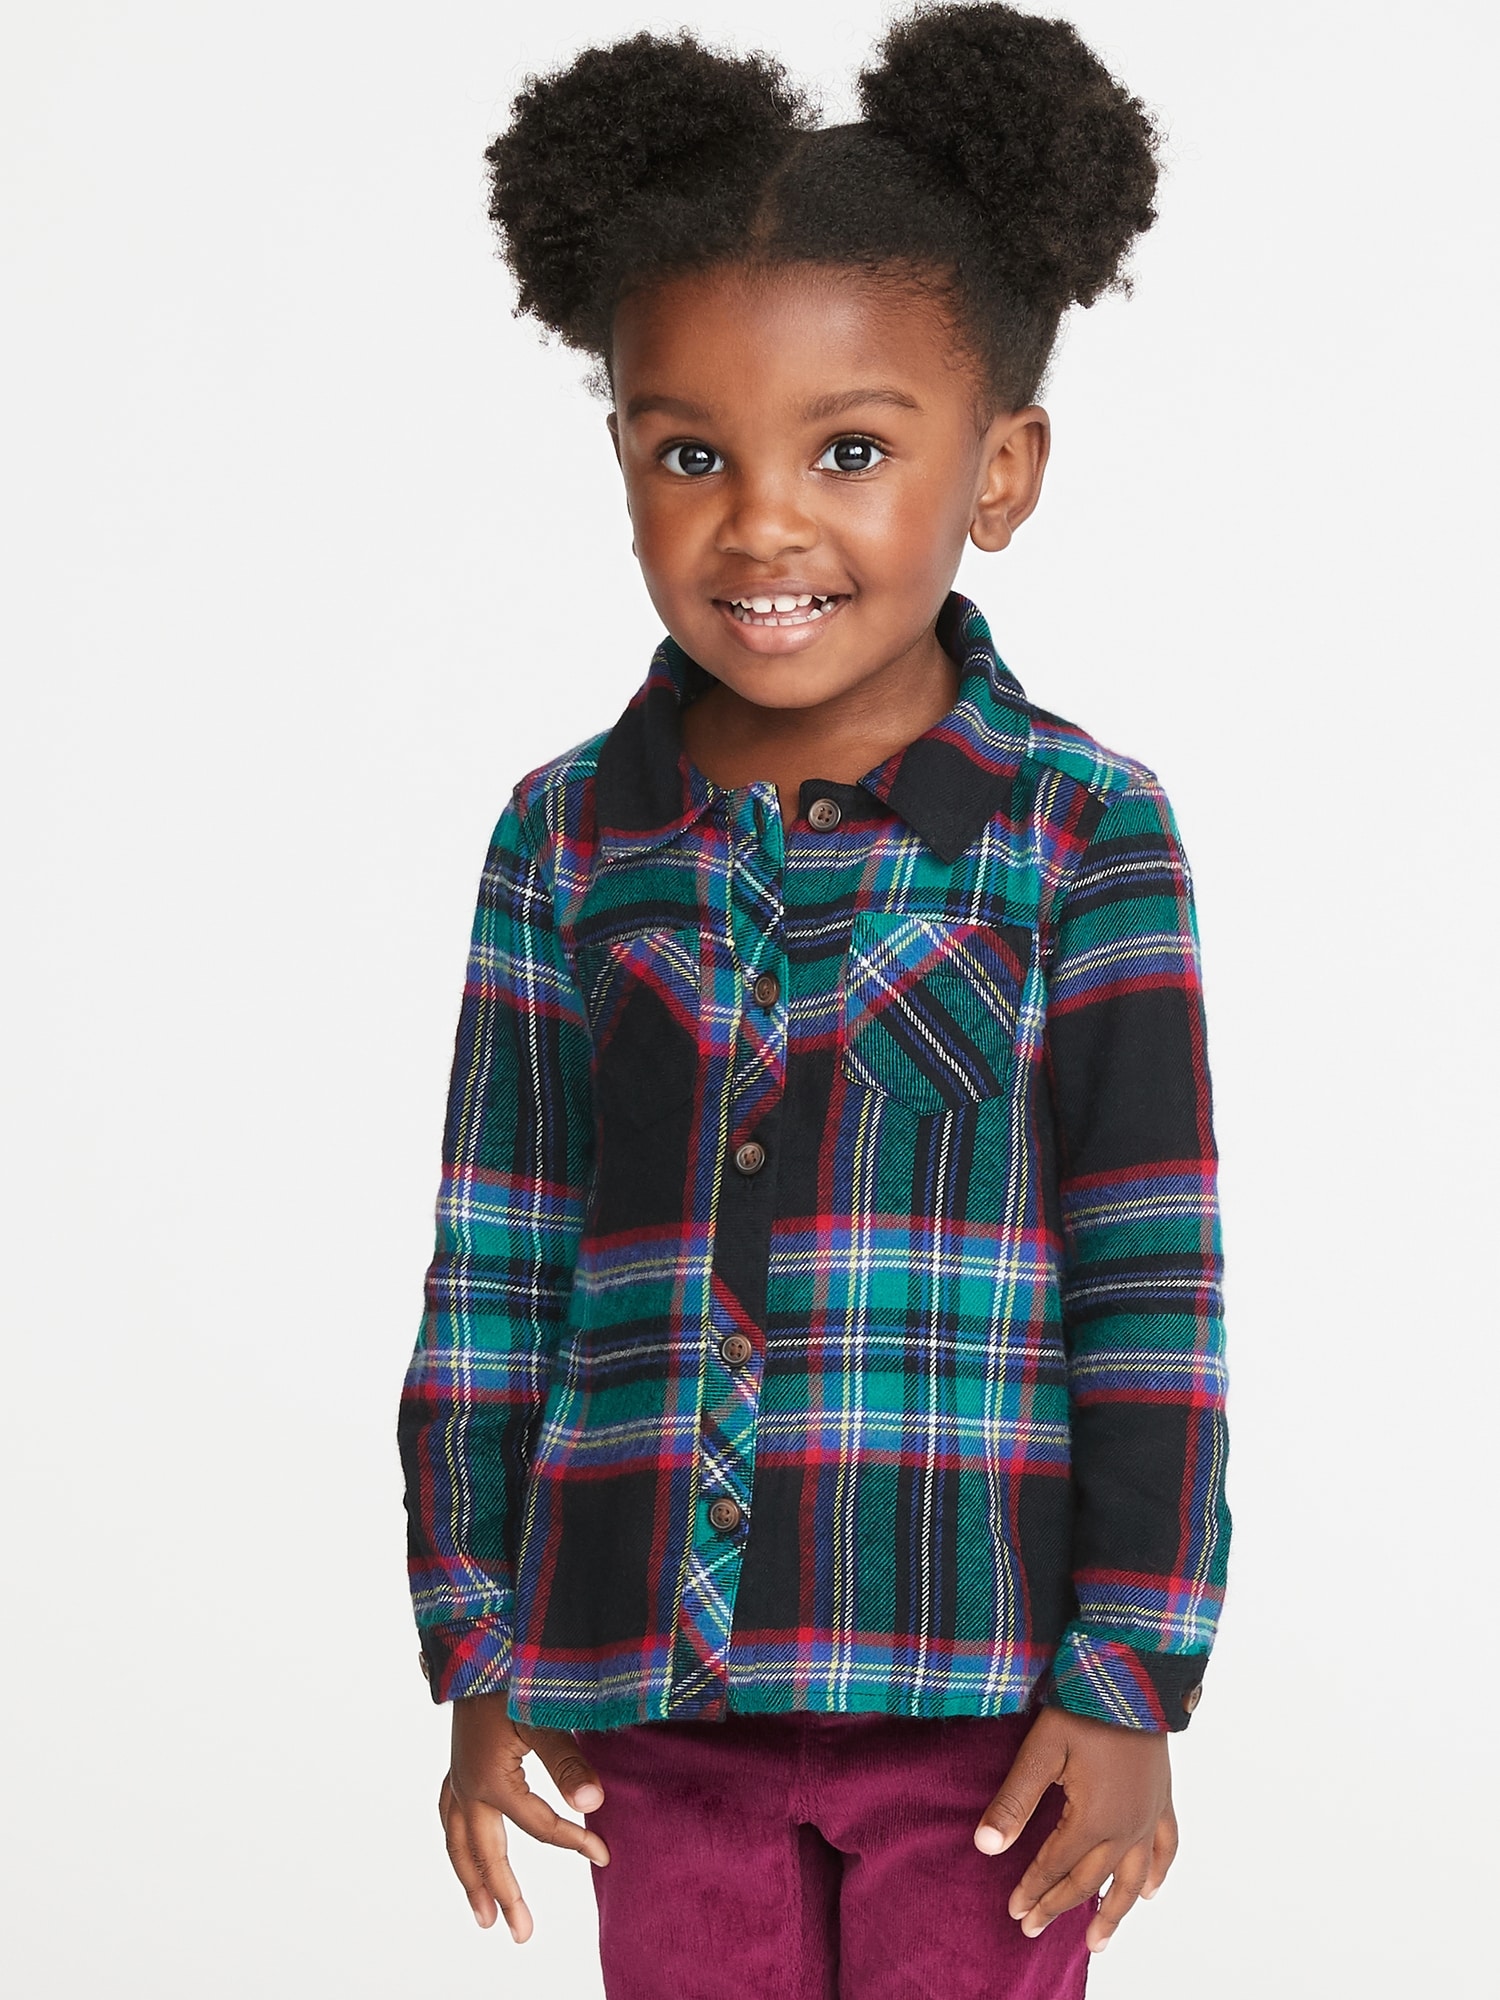 Plaid Flannel Shirt for Toddler Girls | Old Navy